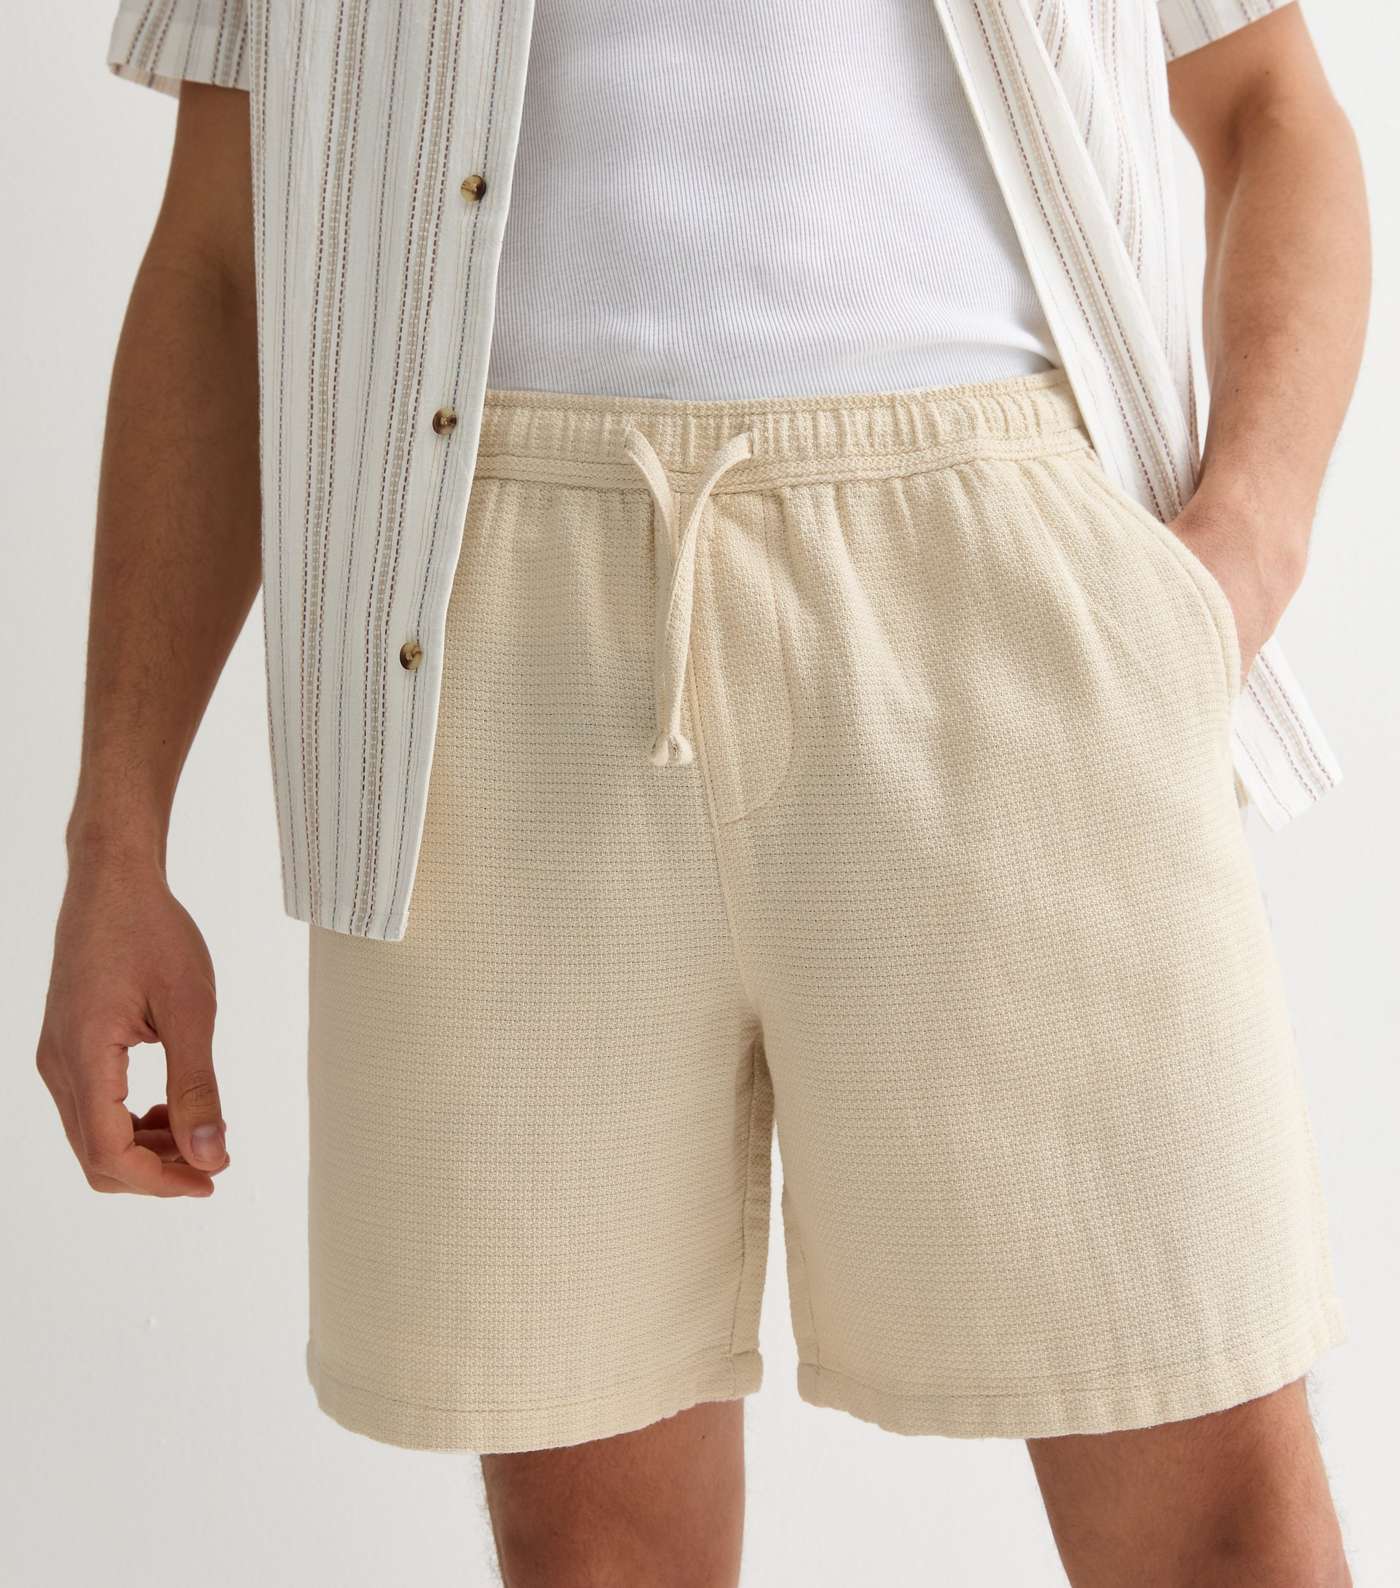 Cream Textured Relaxed Fit Cotton Drawstring Shorts Image 2